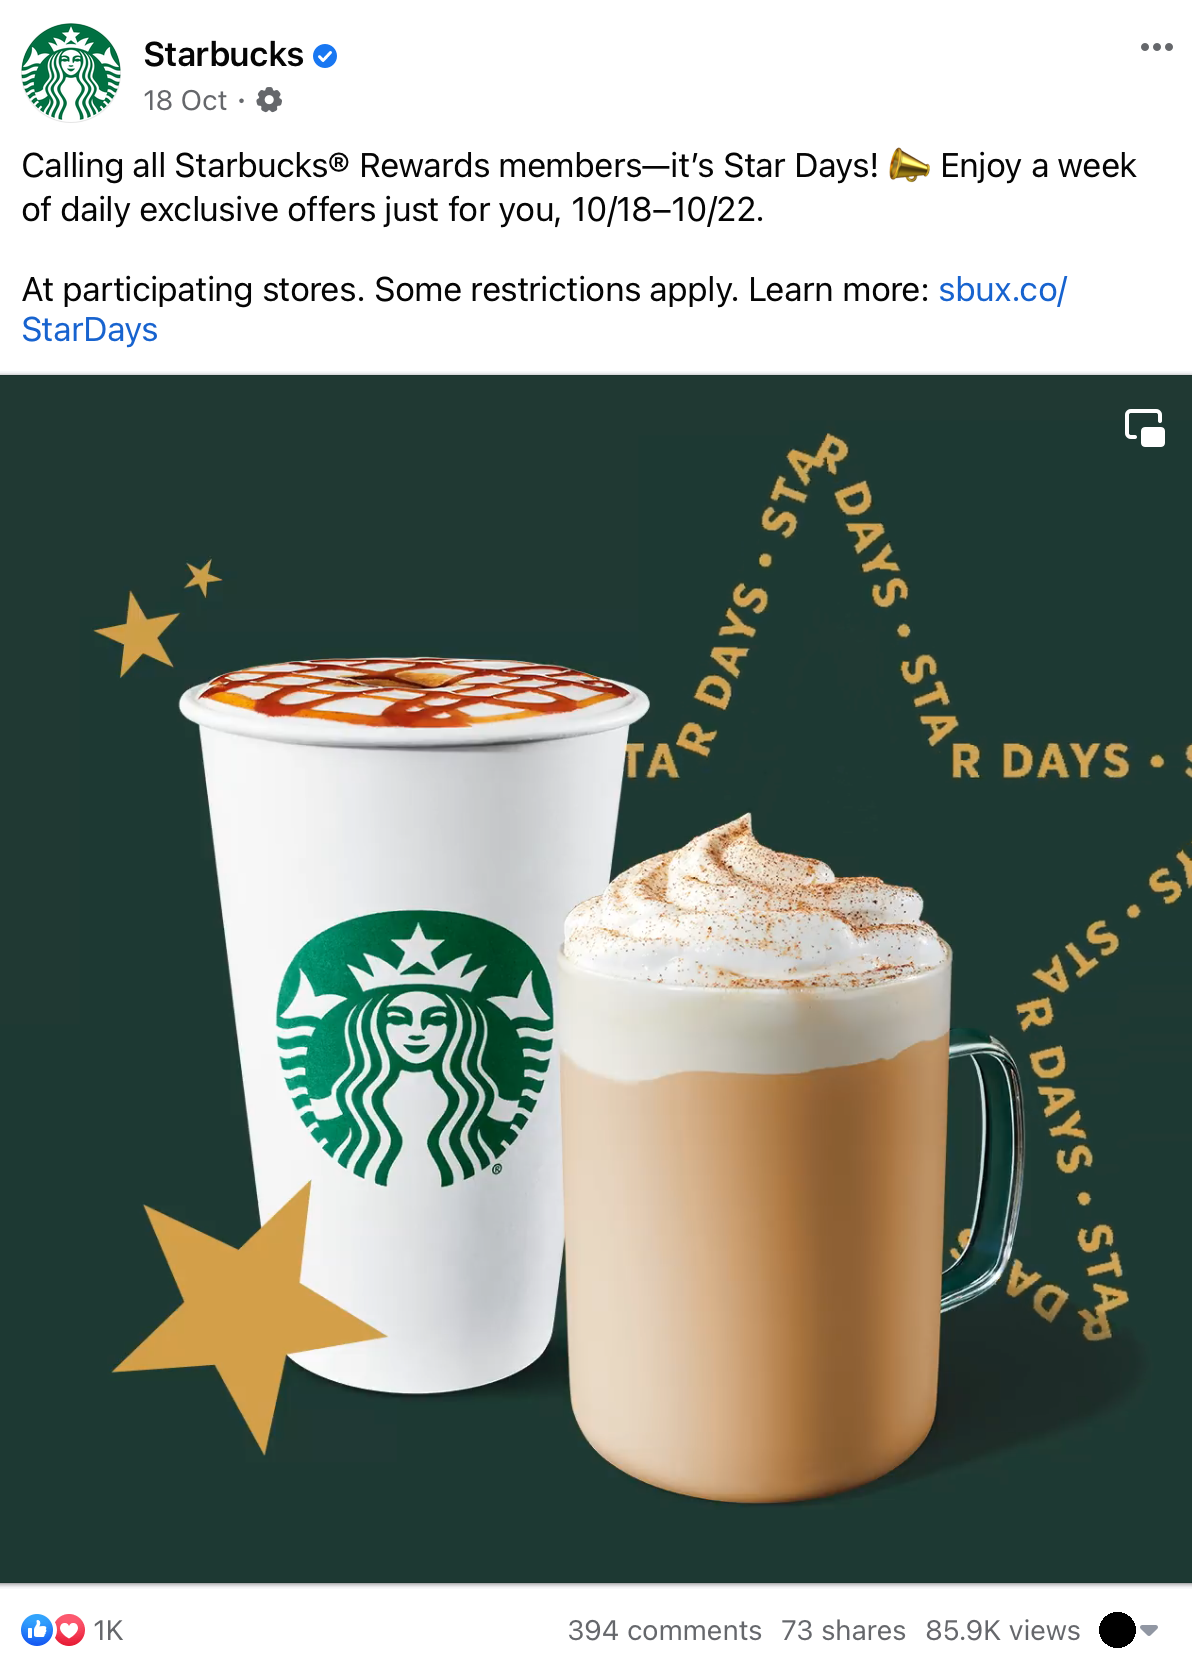 Example: Starbuck's Facebook post promoting new drinks